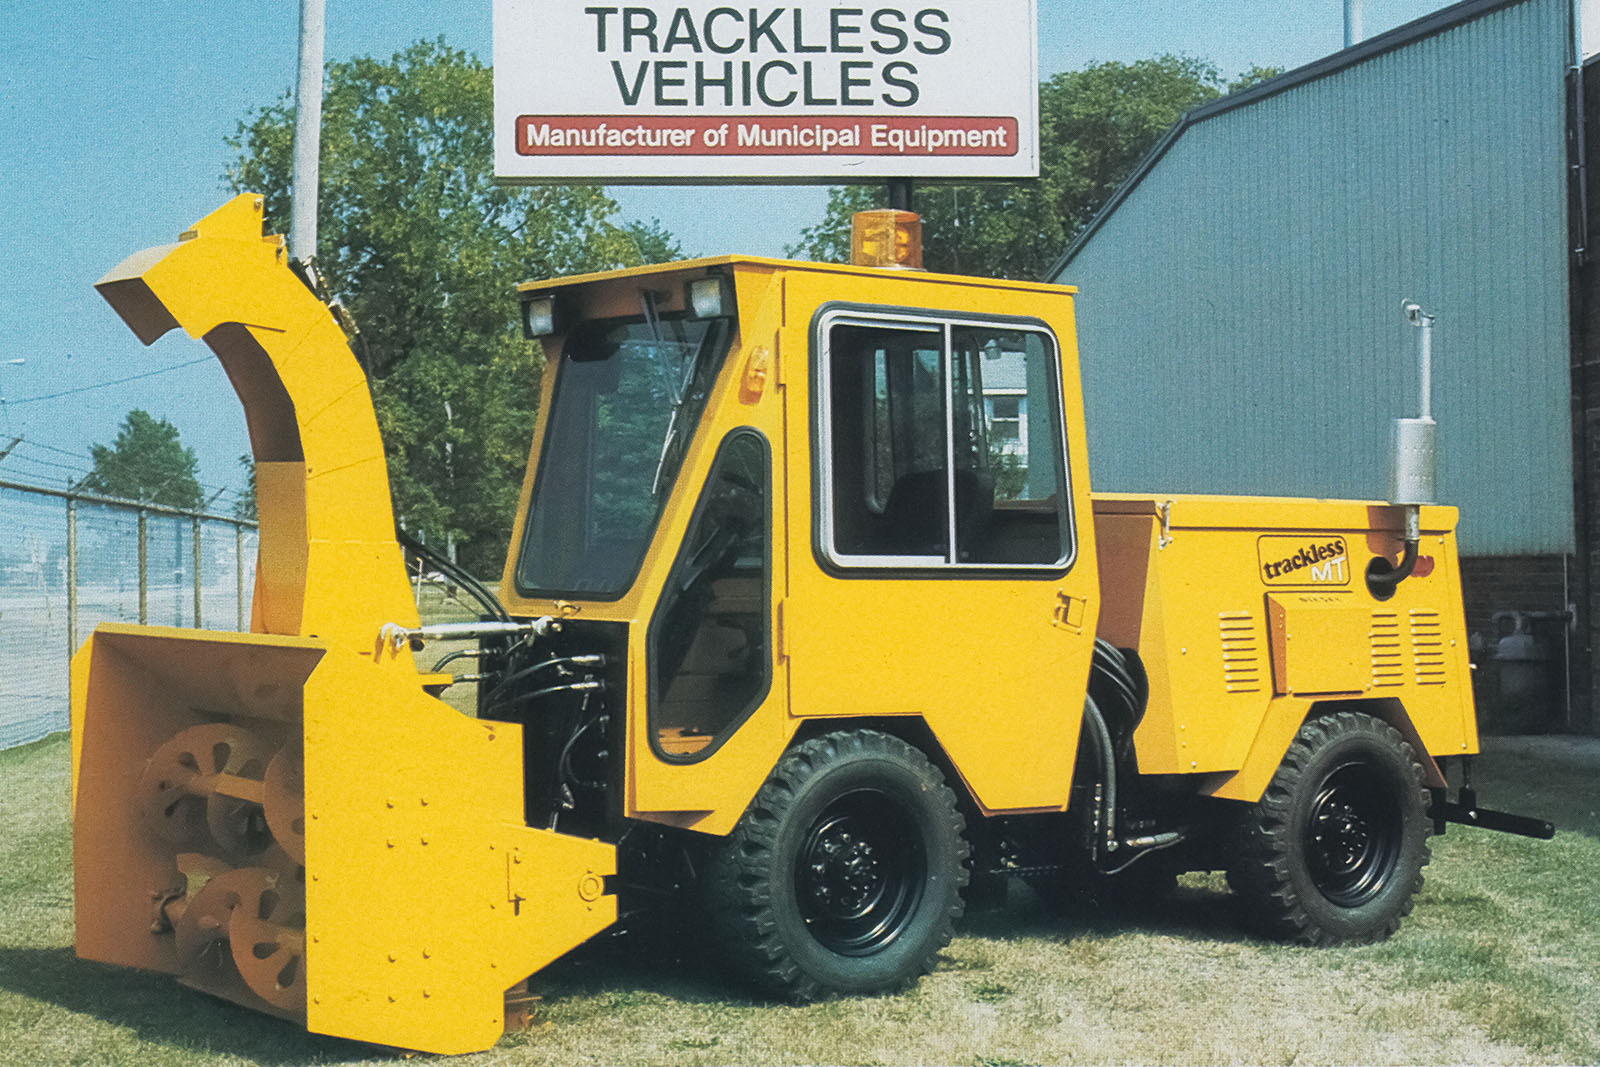 trackless vehicles history mt4 model sidewalk municipal tractor with twin auger snowblower